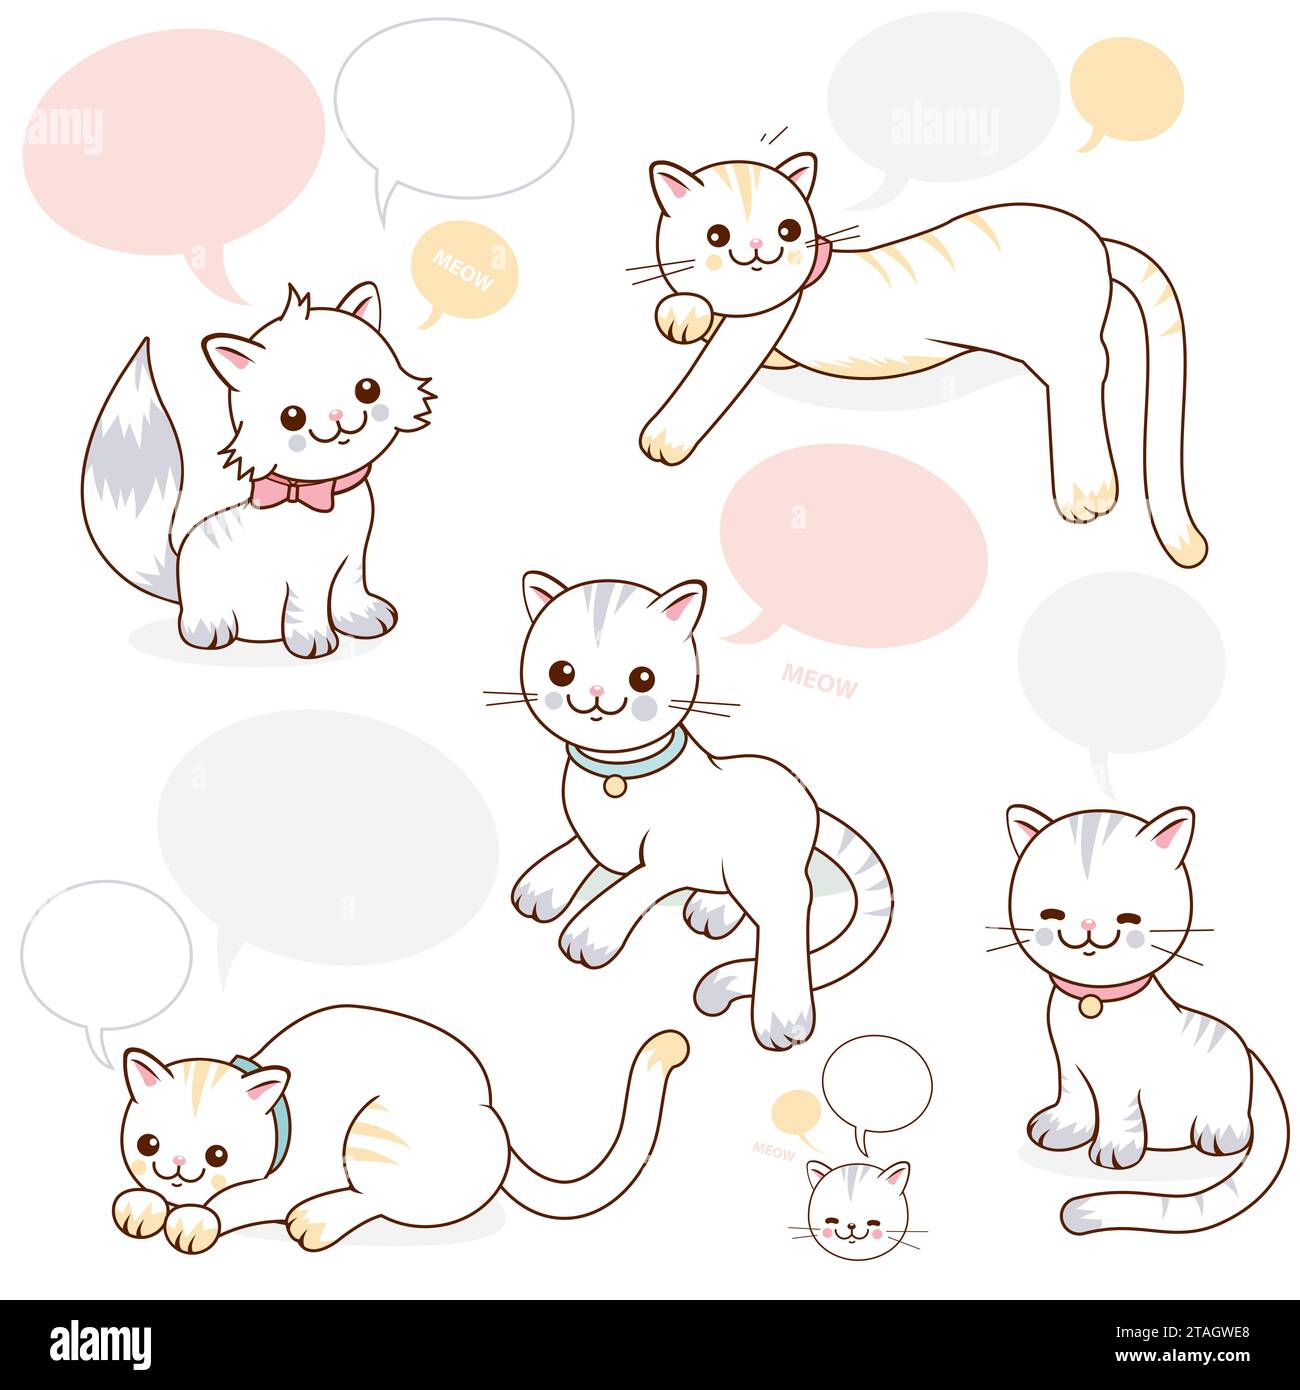 Cartoon cats with speech bubbles. Cute kittens talking or meowing. Blank speech balloons to add text. Stock Photo